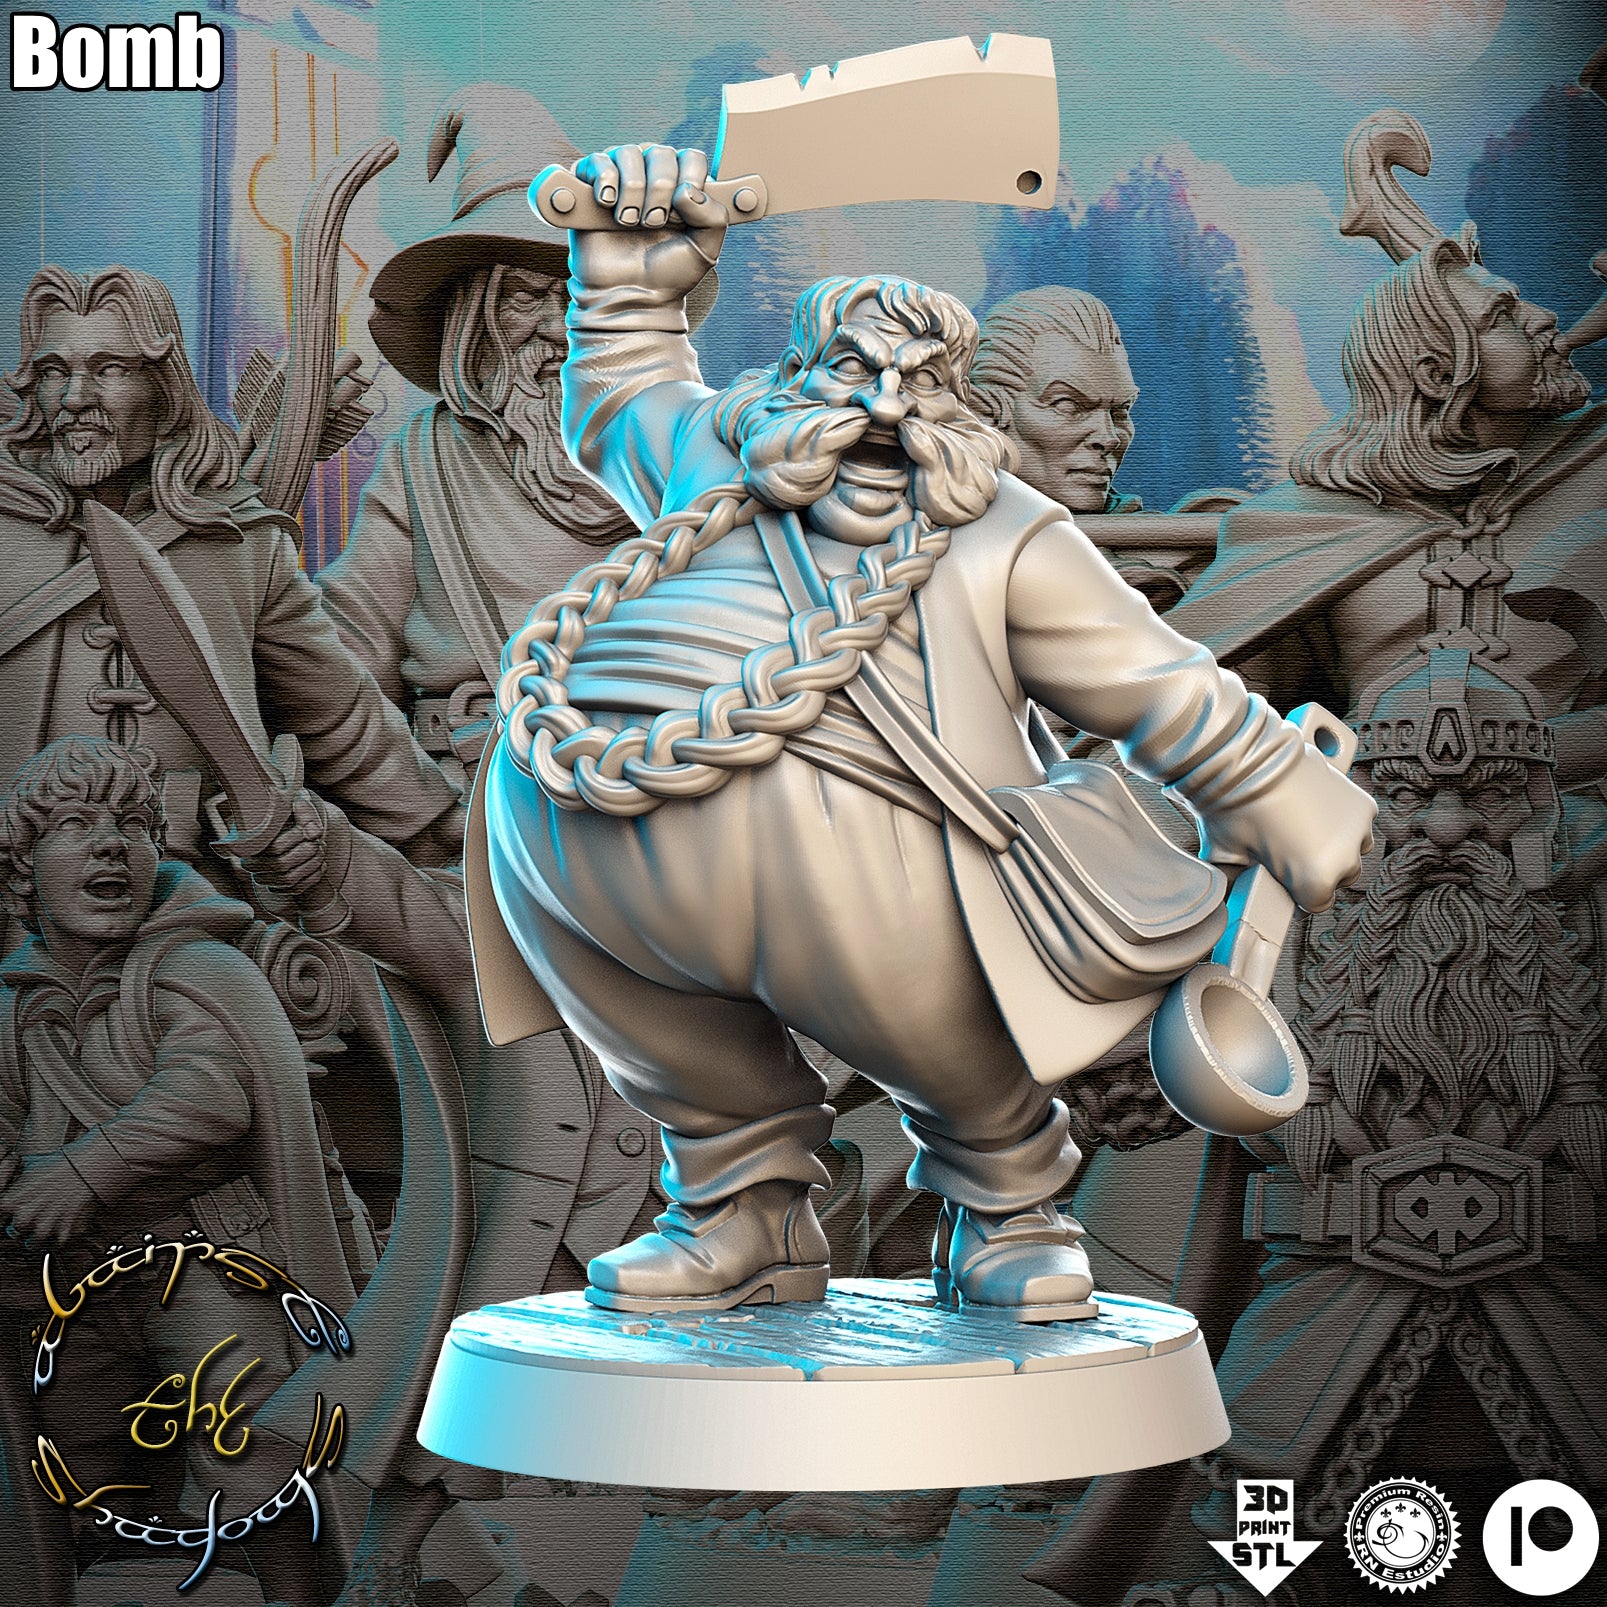 Bomb - Against the Shadows - Green Wildling Miniatures